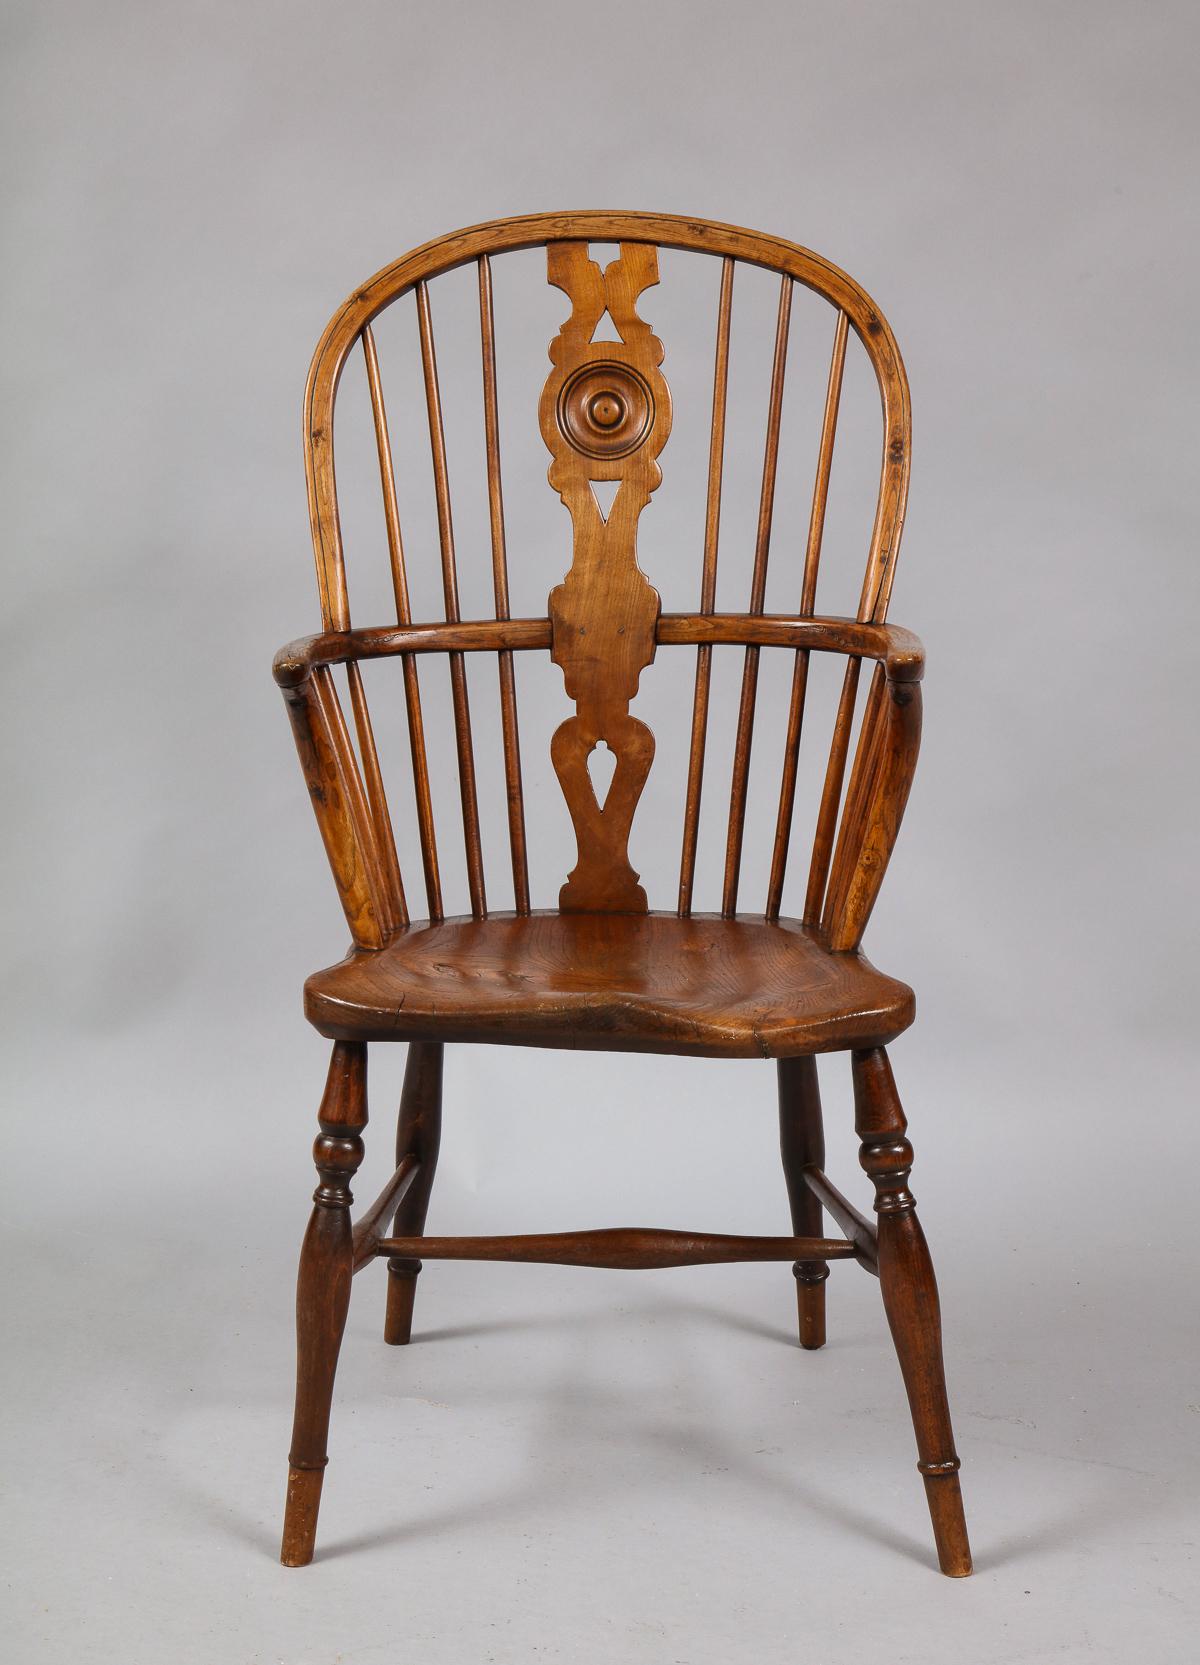 Good 19th century English hoop back Windsor armchair with roundel turned back splat, over shaped seat and standing on turned legs joined by 